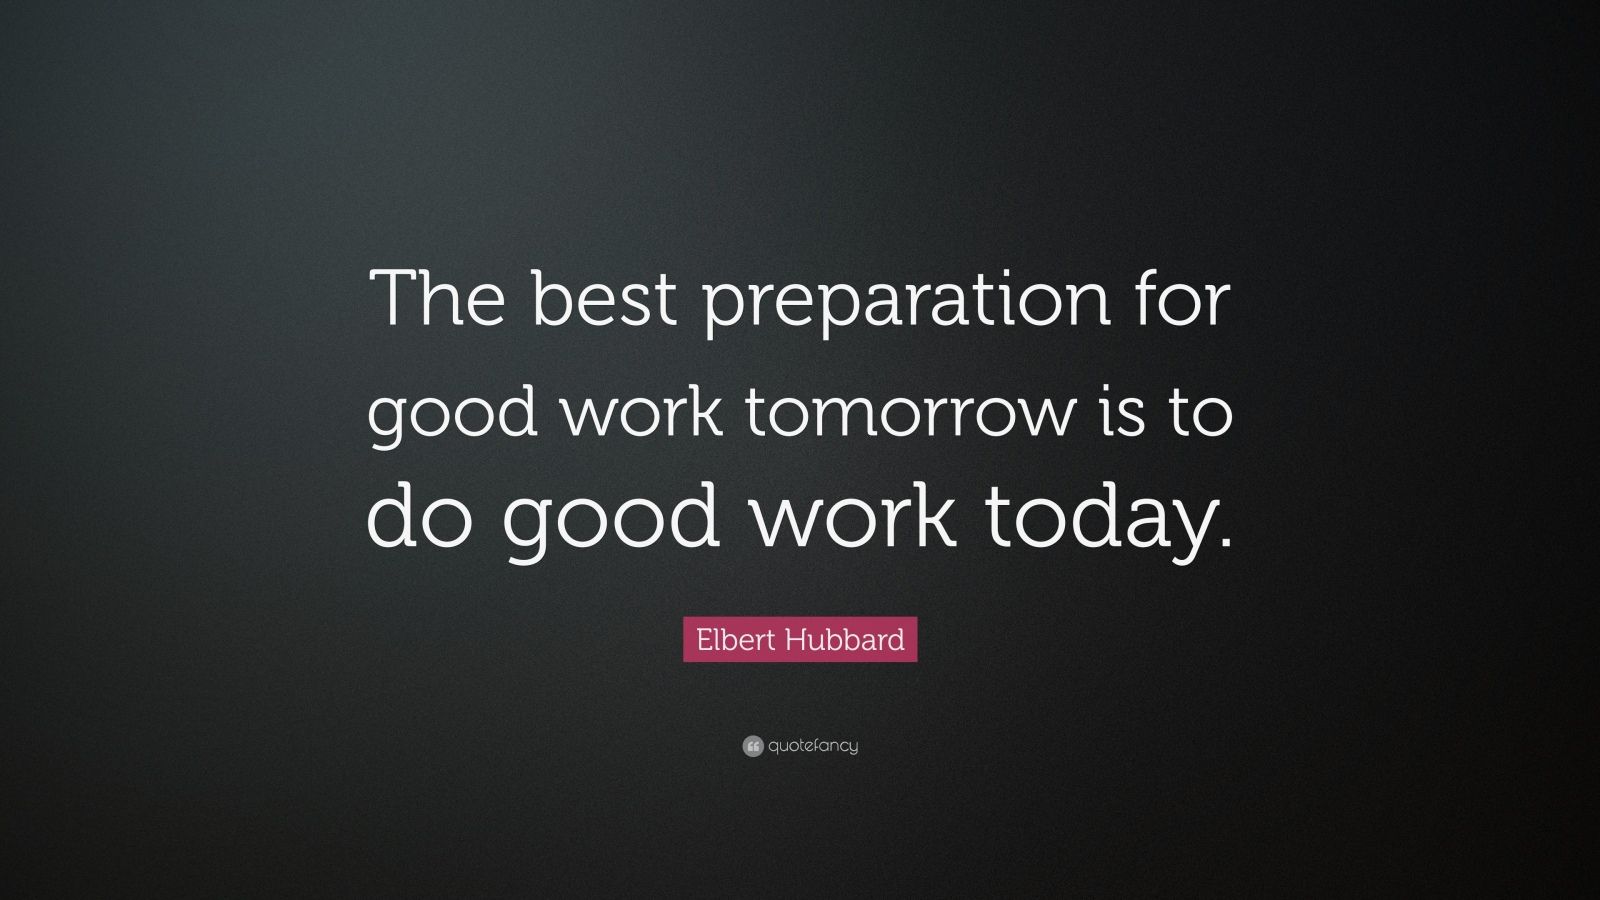 Elbert Hubbard Quote: "The best preparation for good work tomorrow is ...